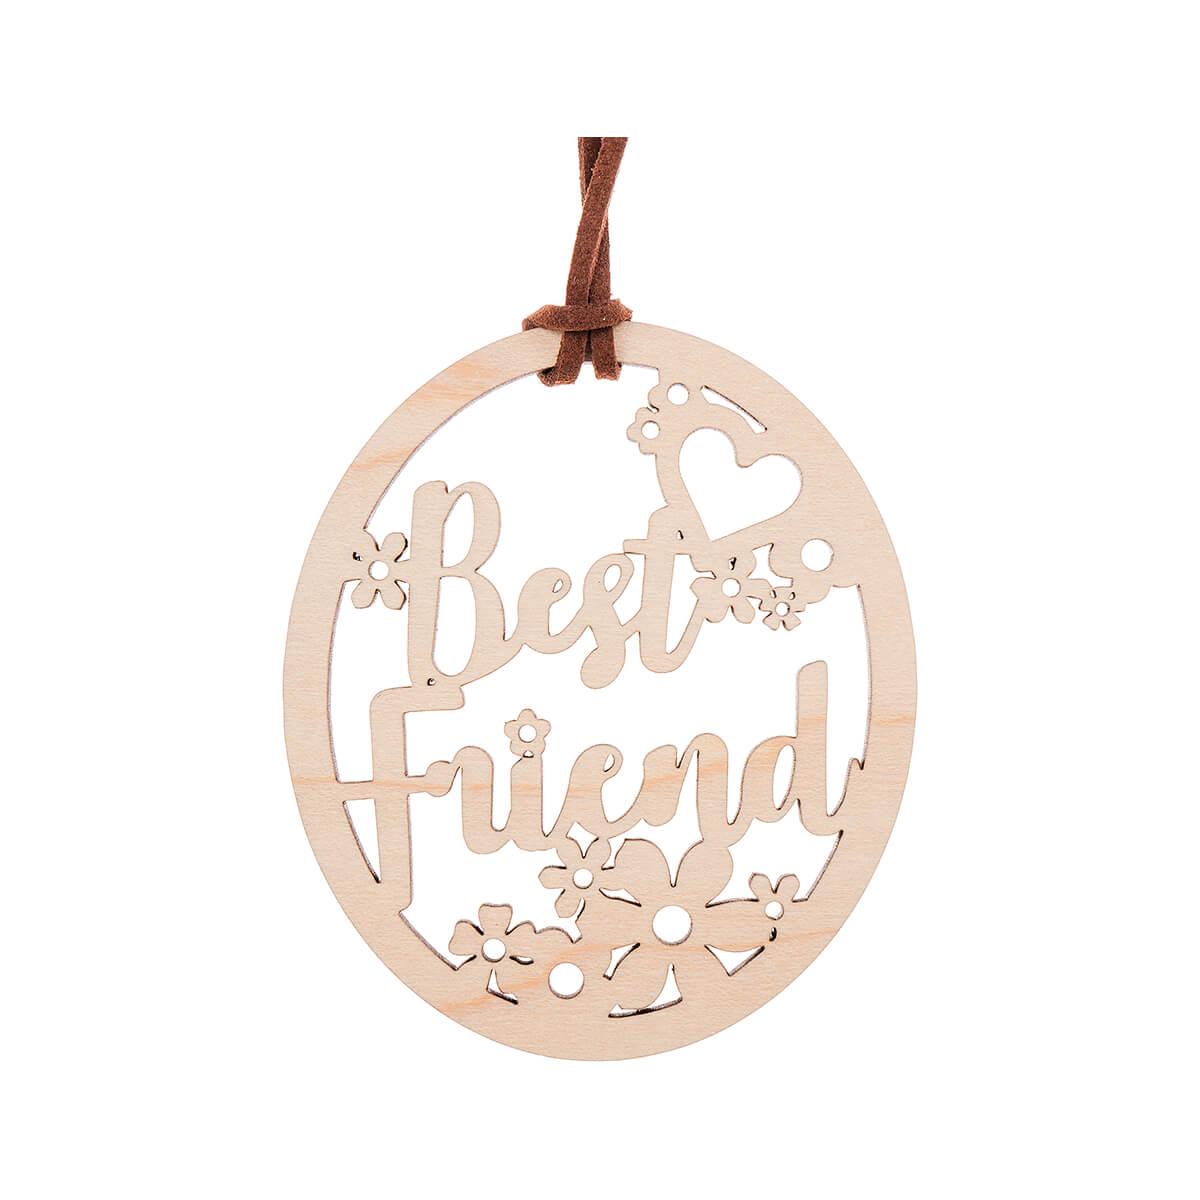  Wooden Oval Cut Out Best Friend Floral Ornament